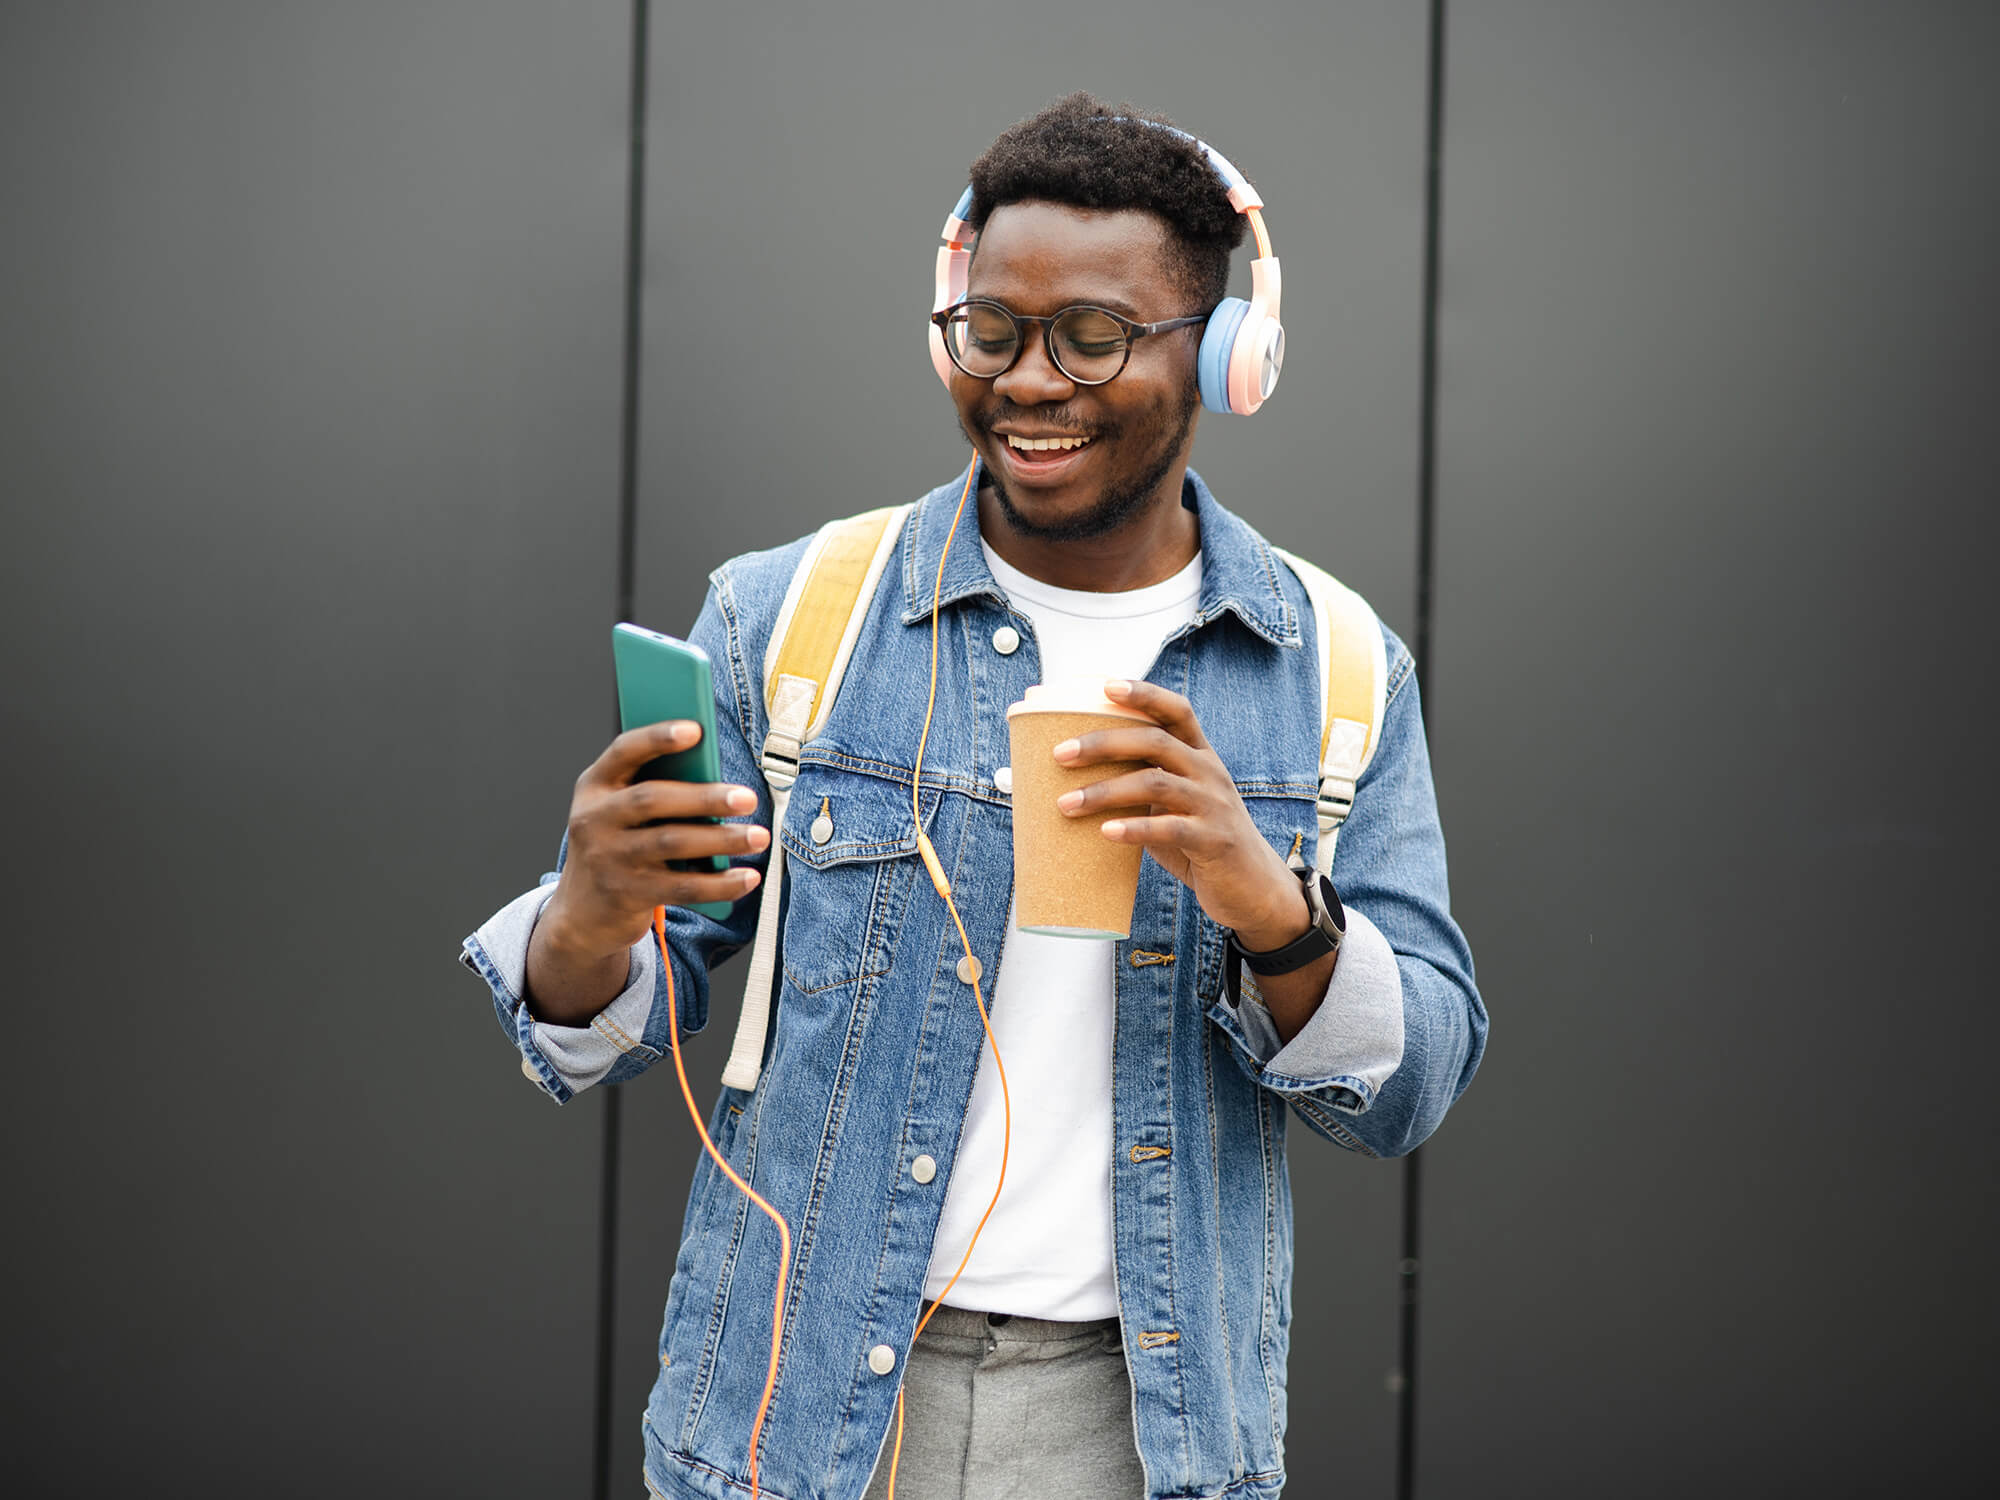 A young man listening to music through headphones and smiling. He holds his phone in one hand and drink in the other.